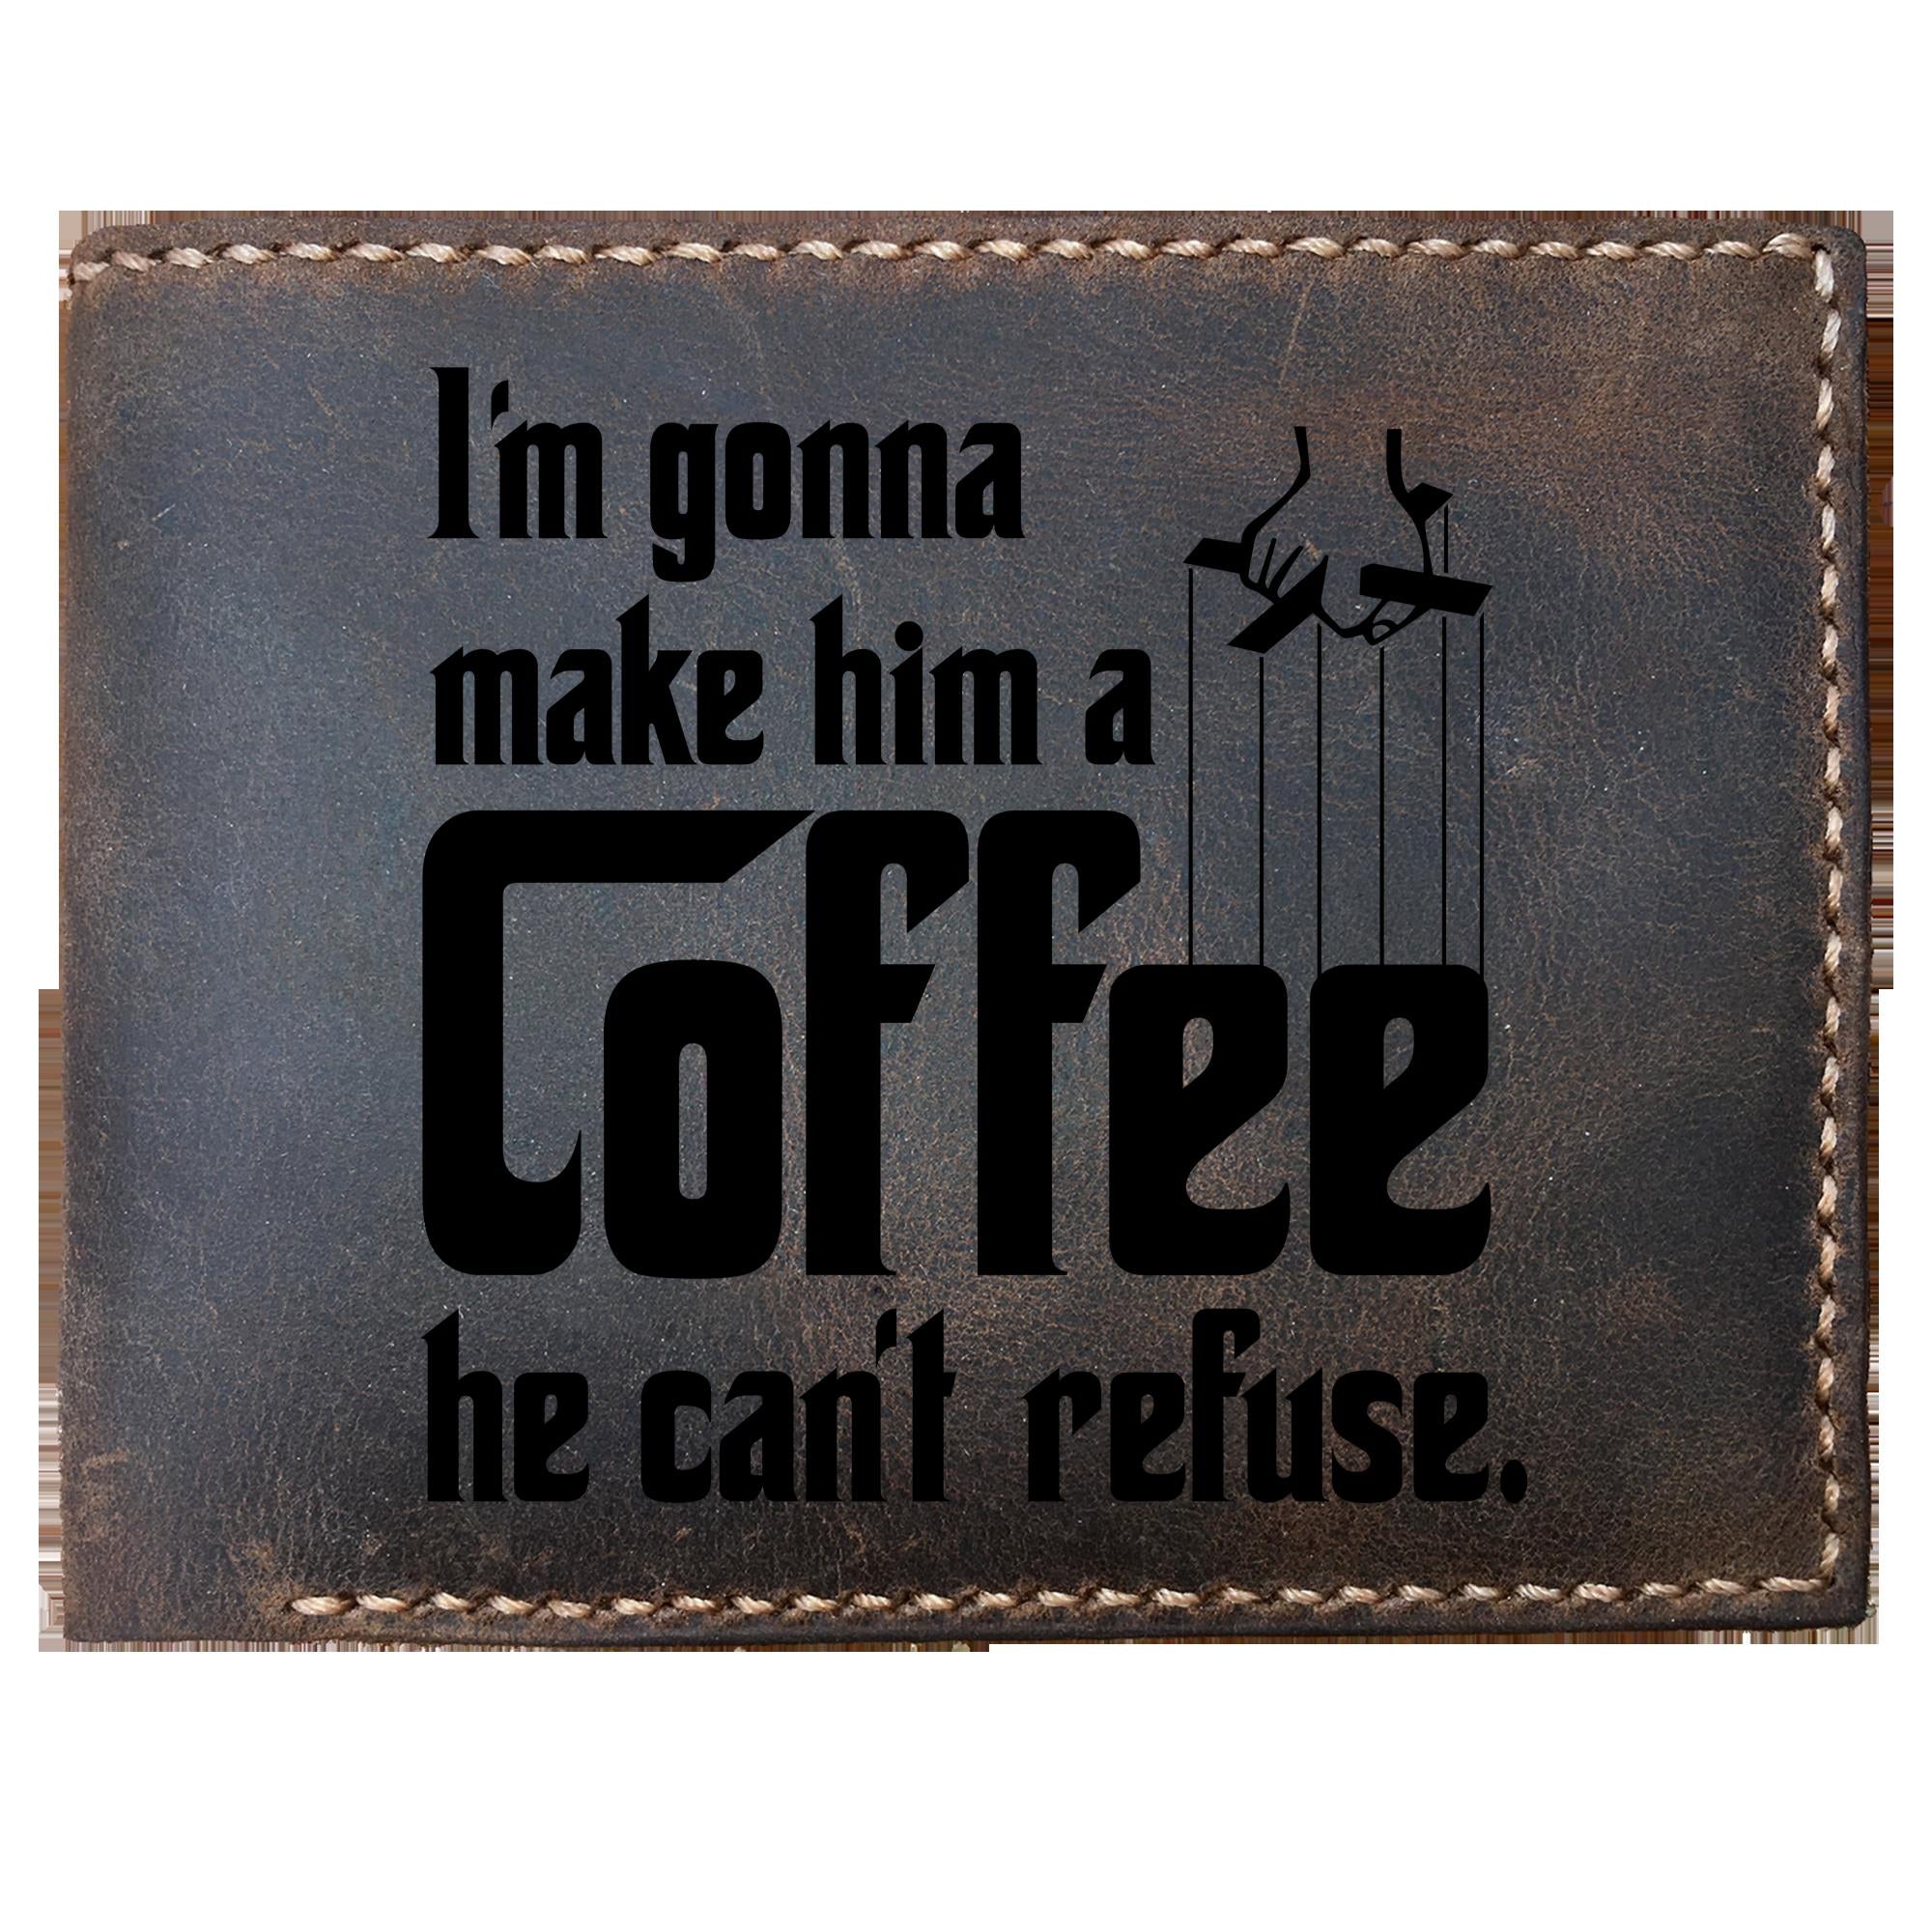 Skitongifts Funny Custom Laser Engraved Bifold Leather Wallet For Men, Funny Godfather Make A Coffee He Cant Refuse